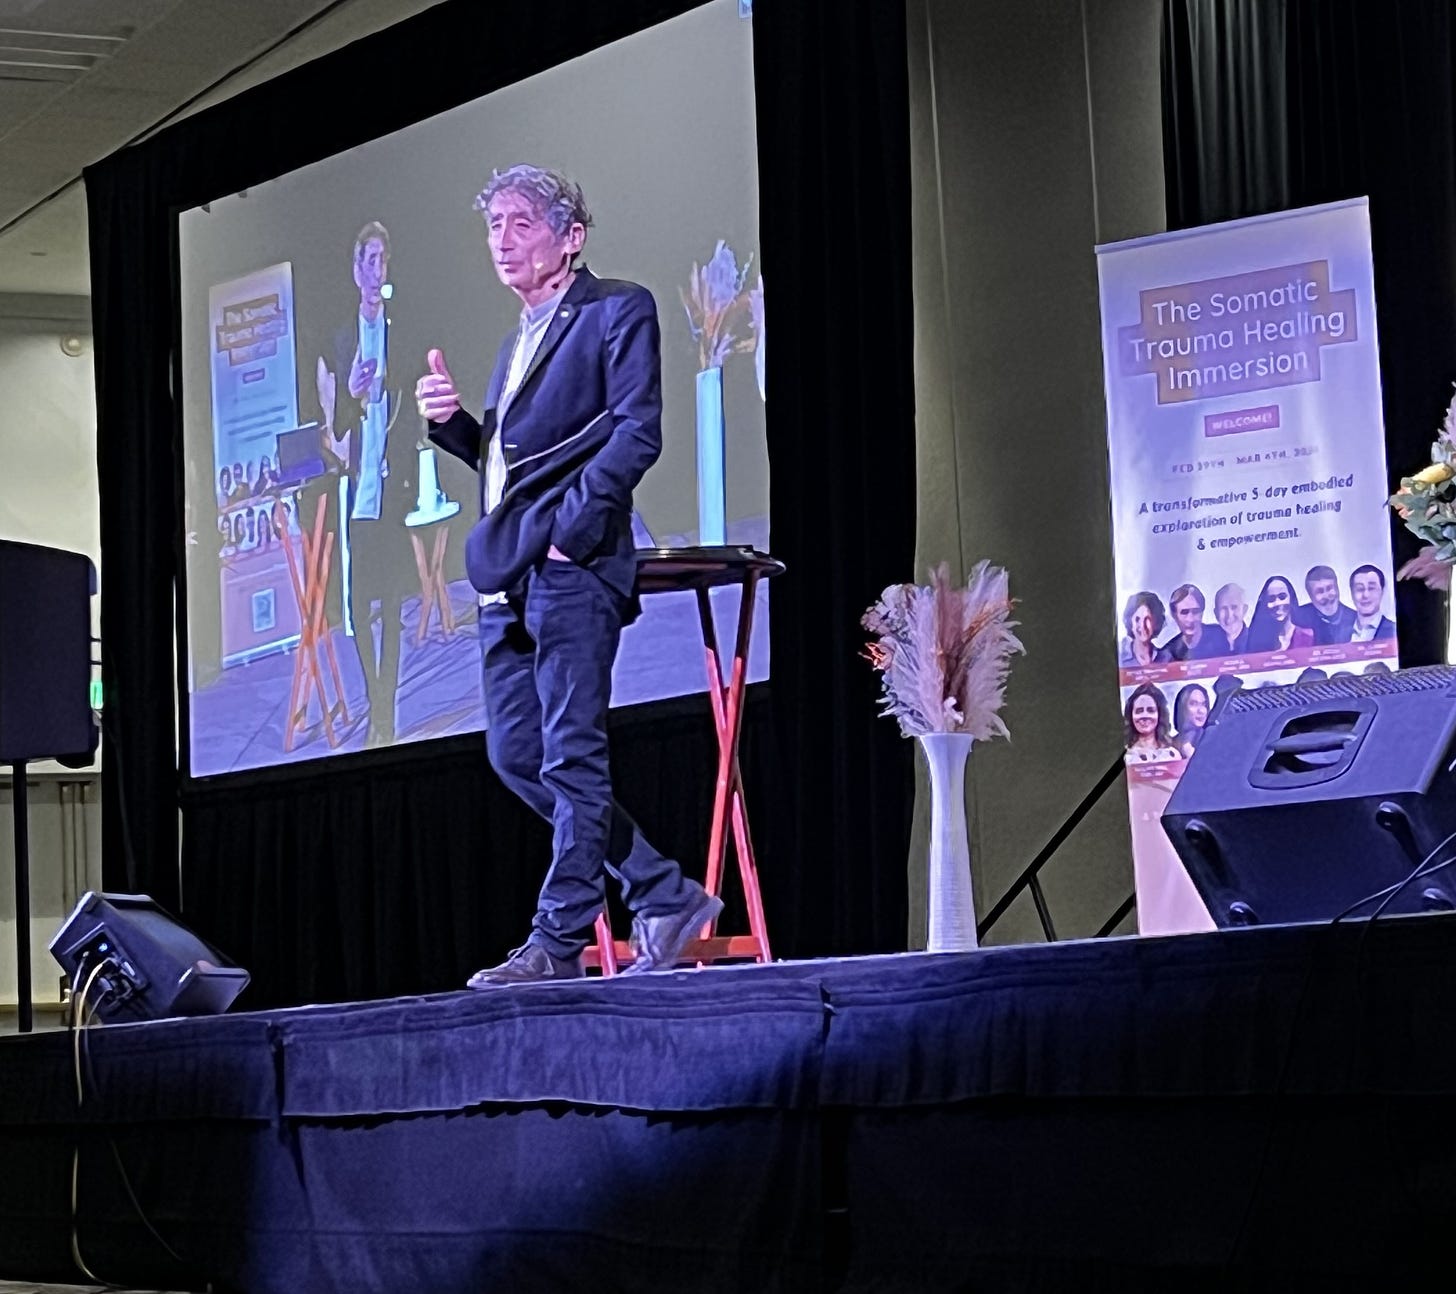 Dr. Gabor Maté at Somatic Trauma Healing Immersion conference